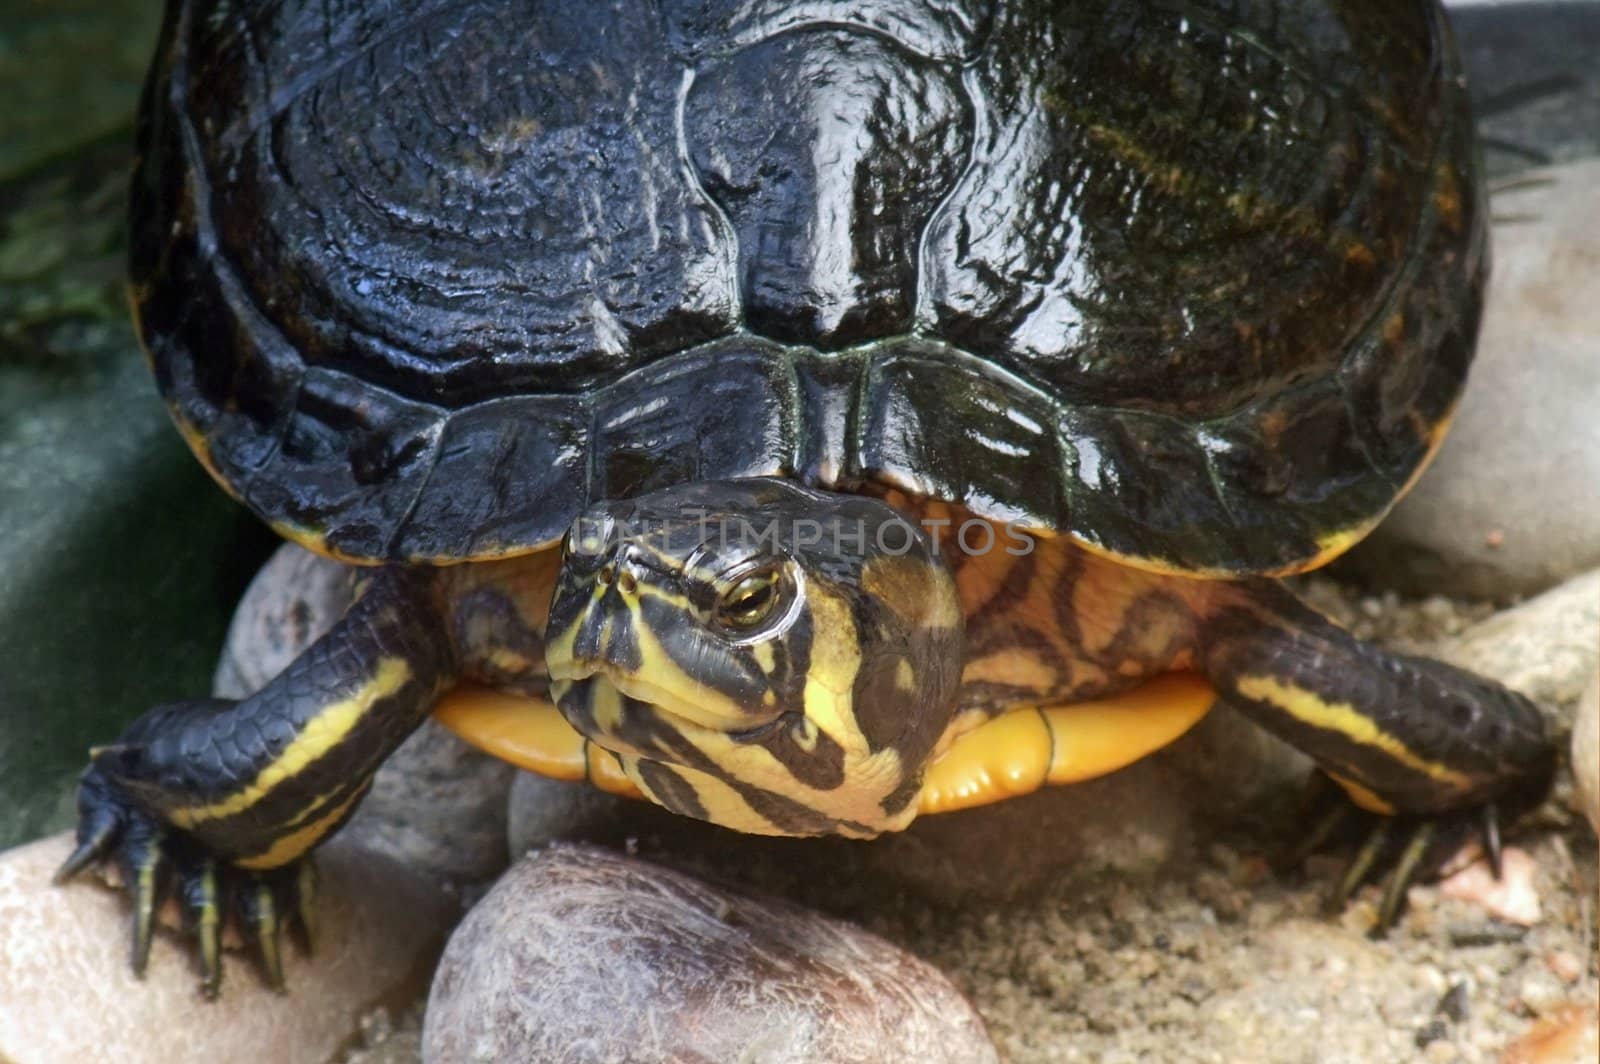 high angle frontal detail of a freshwater turtle in stony ambiance